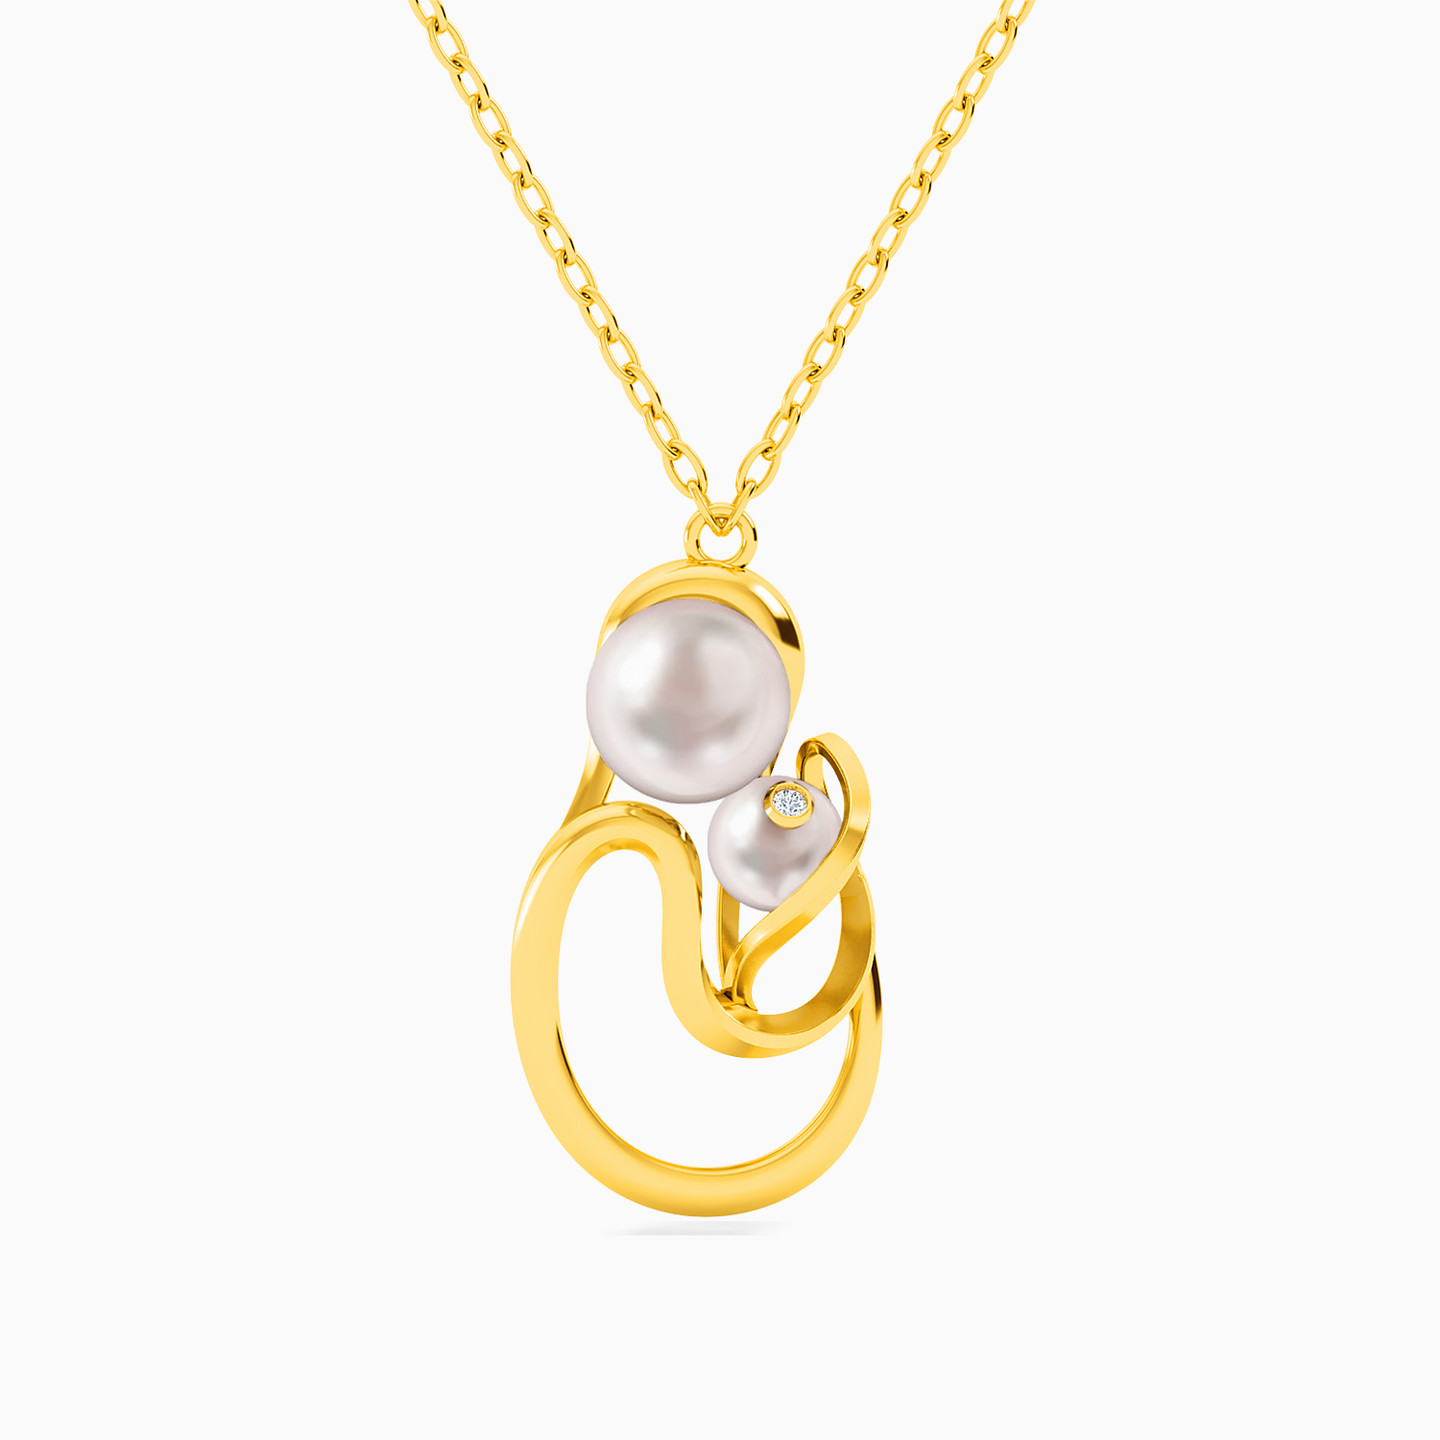 18K Gold Pearls Pendant Necklace